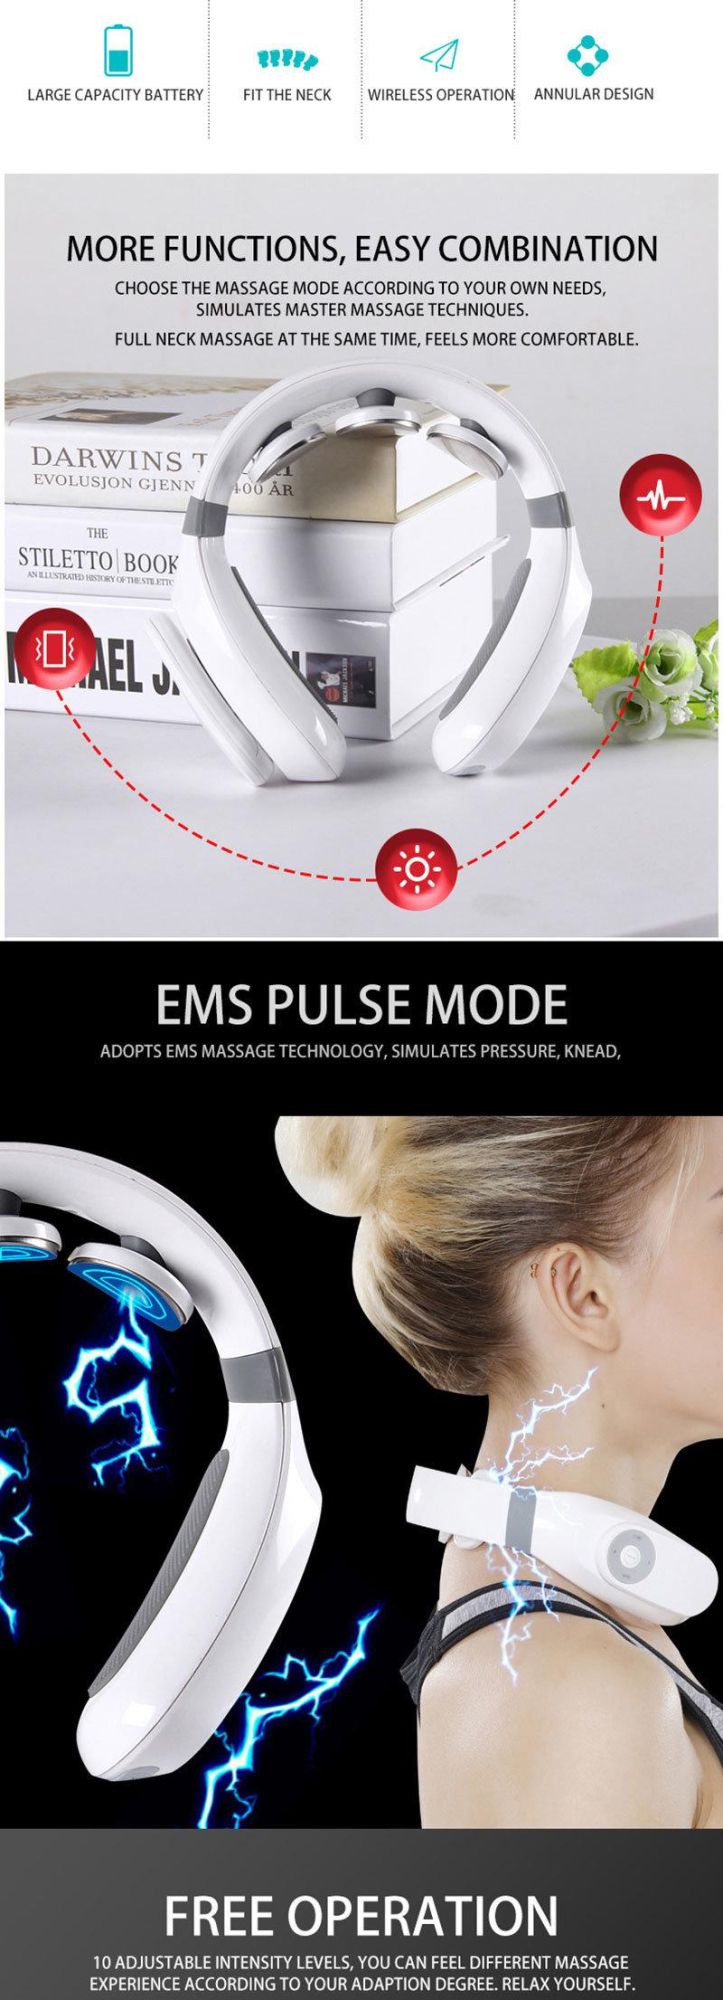 Hezheng Portable Cordless Office Electric EMS Cervical Neck Massage Intelligent Remote Control Therapy Neck Heating Massager